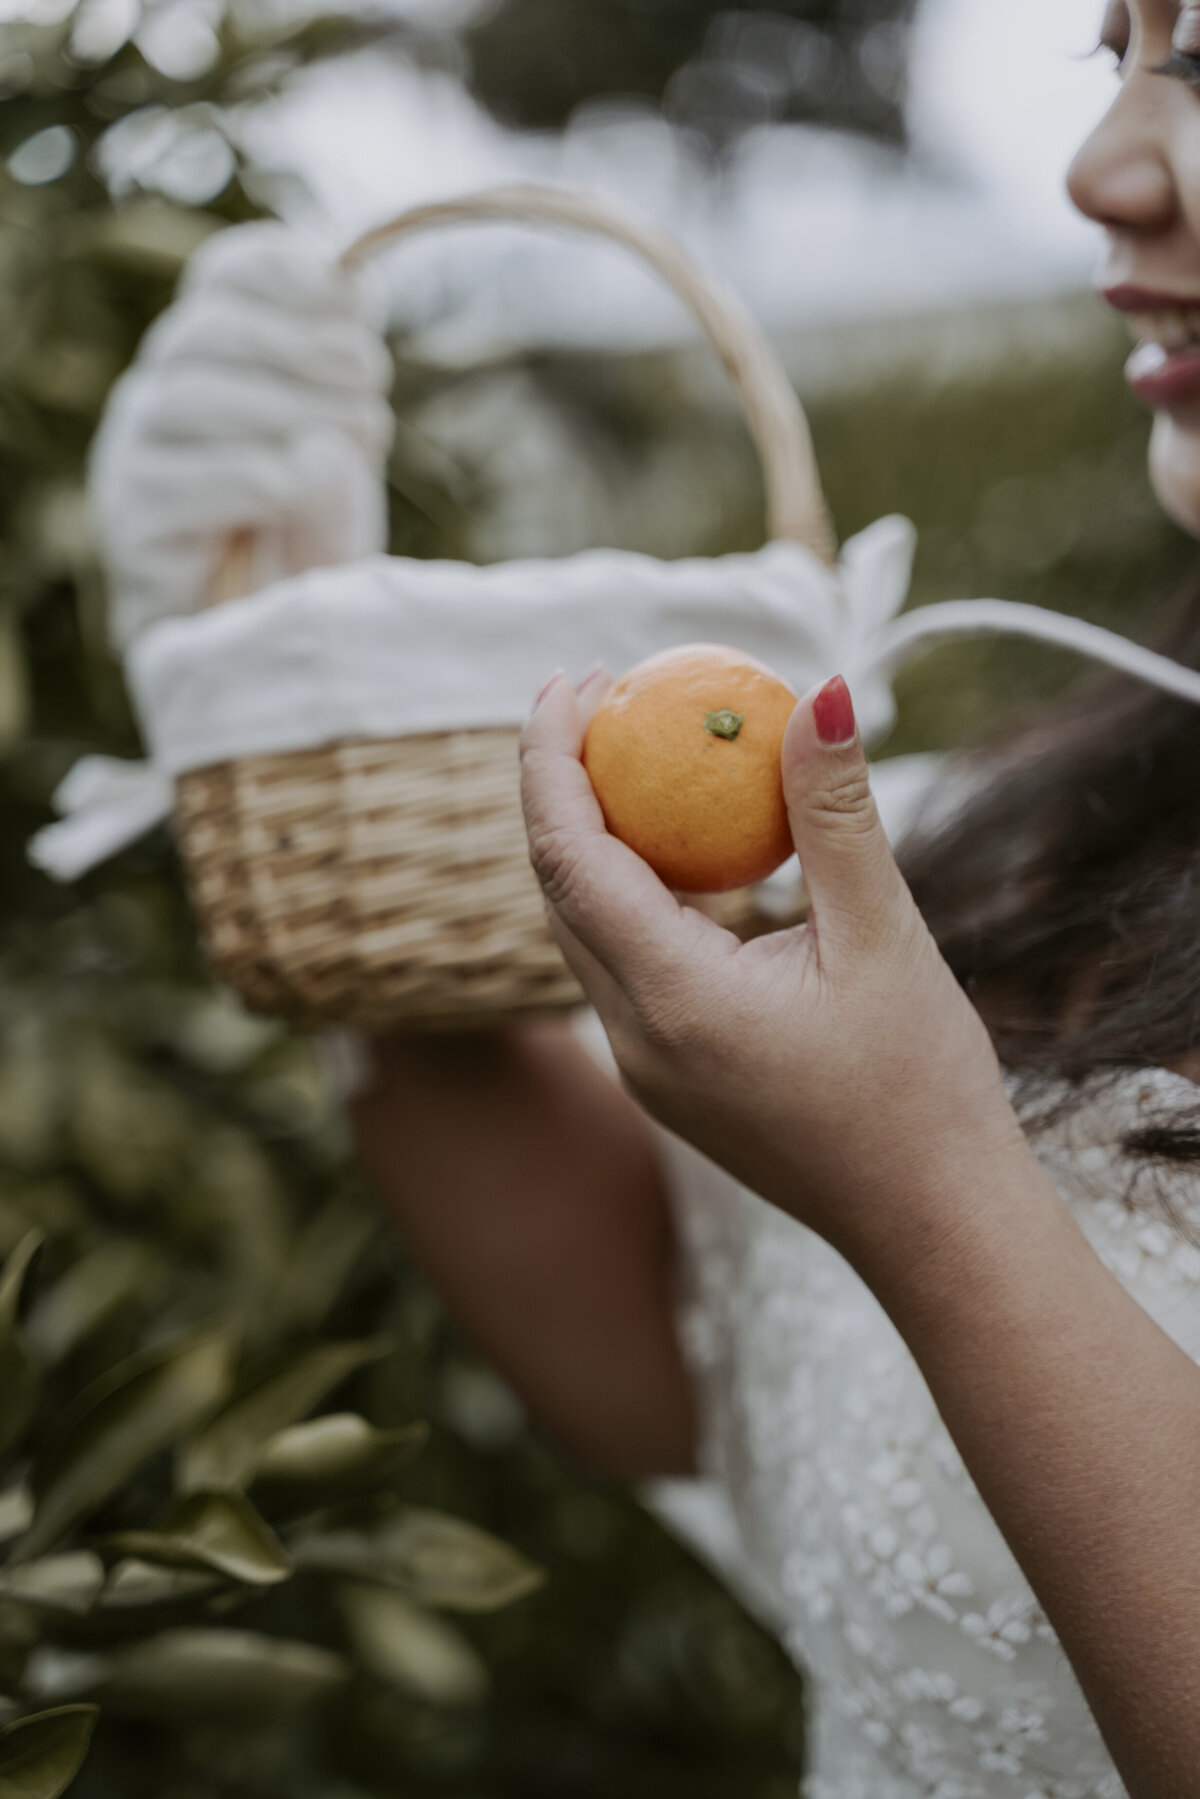 the tangerine and small basket holding by the bride